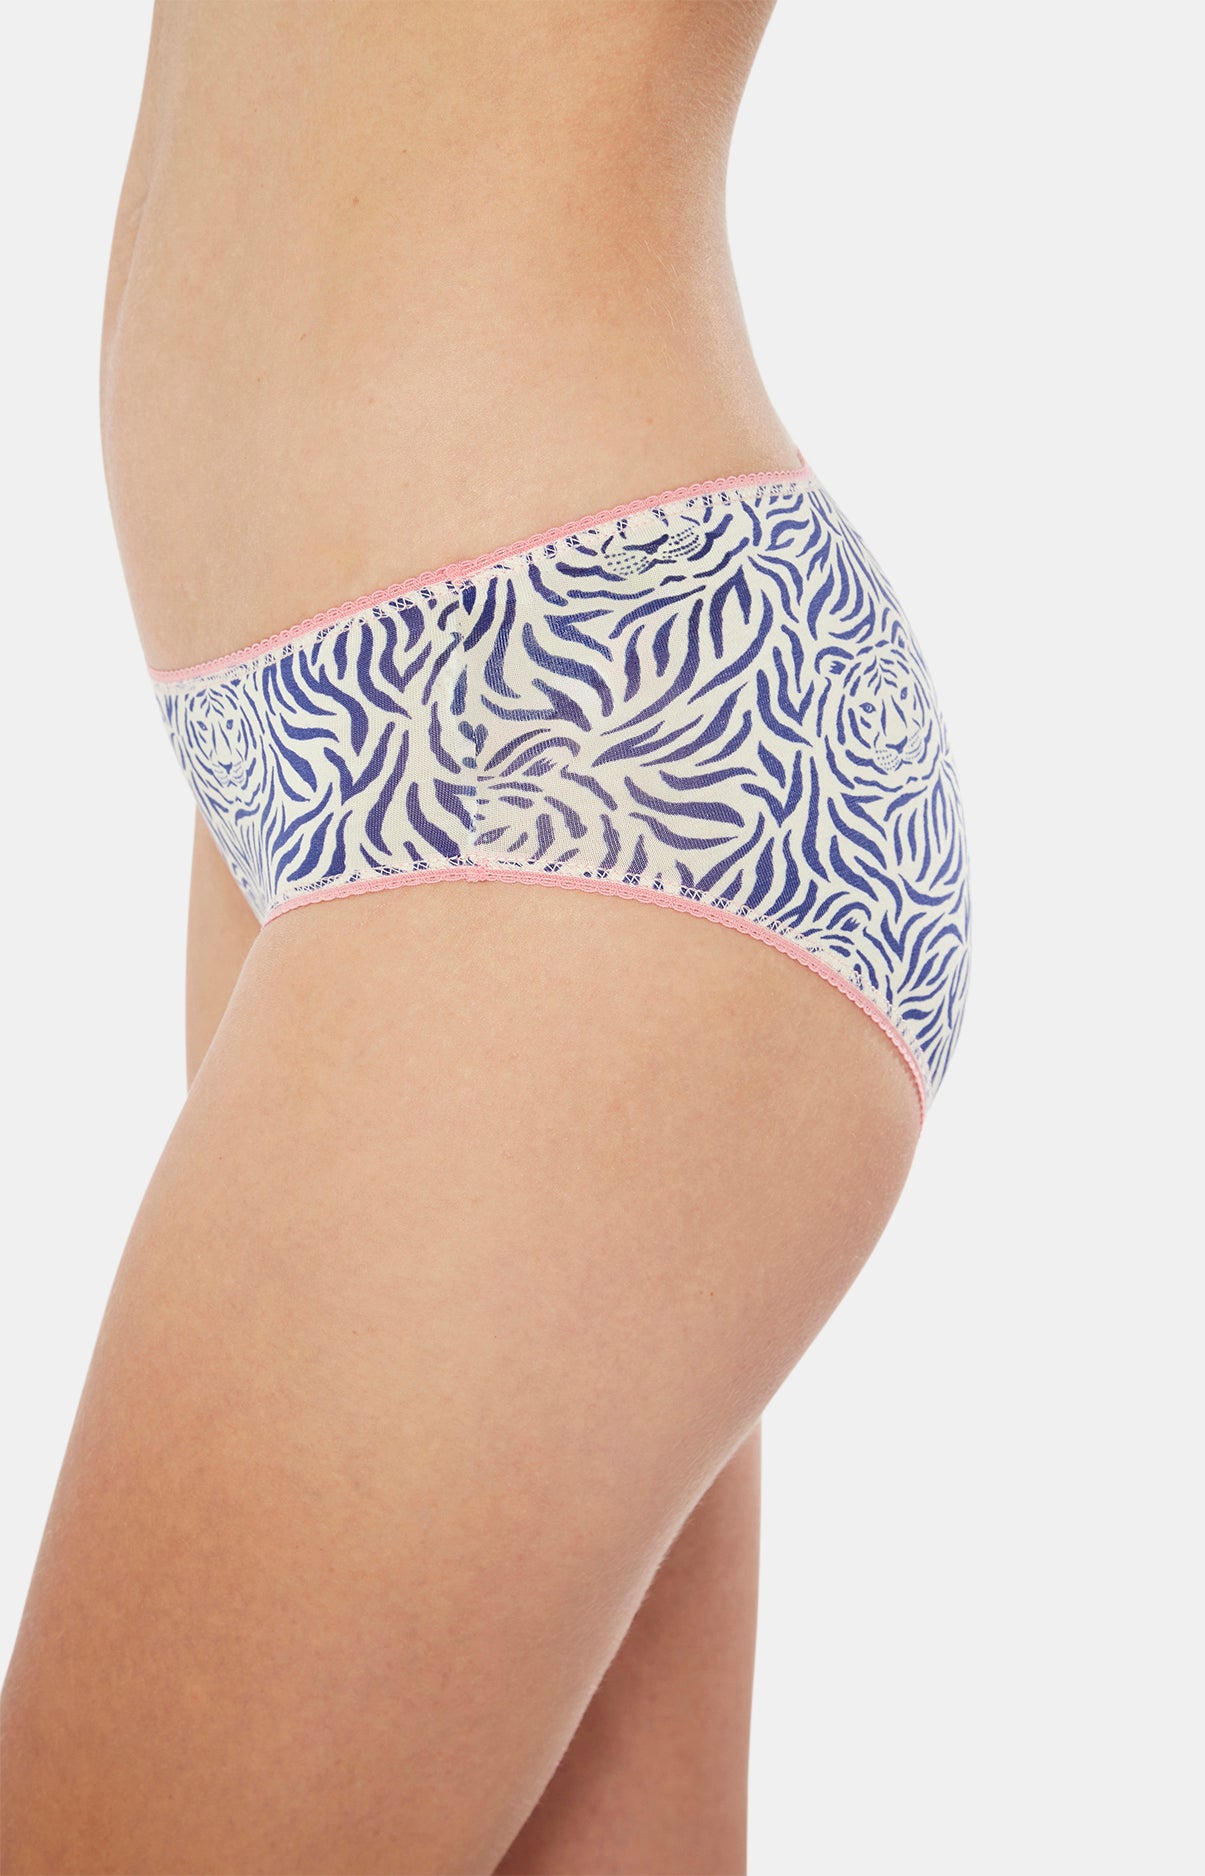 The Tiger Poses Women Boxer Shorts (Ultra Light Cambric Cotton) –